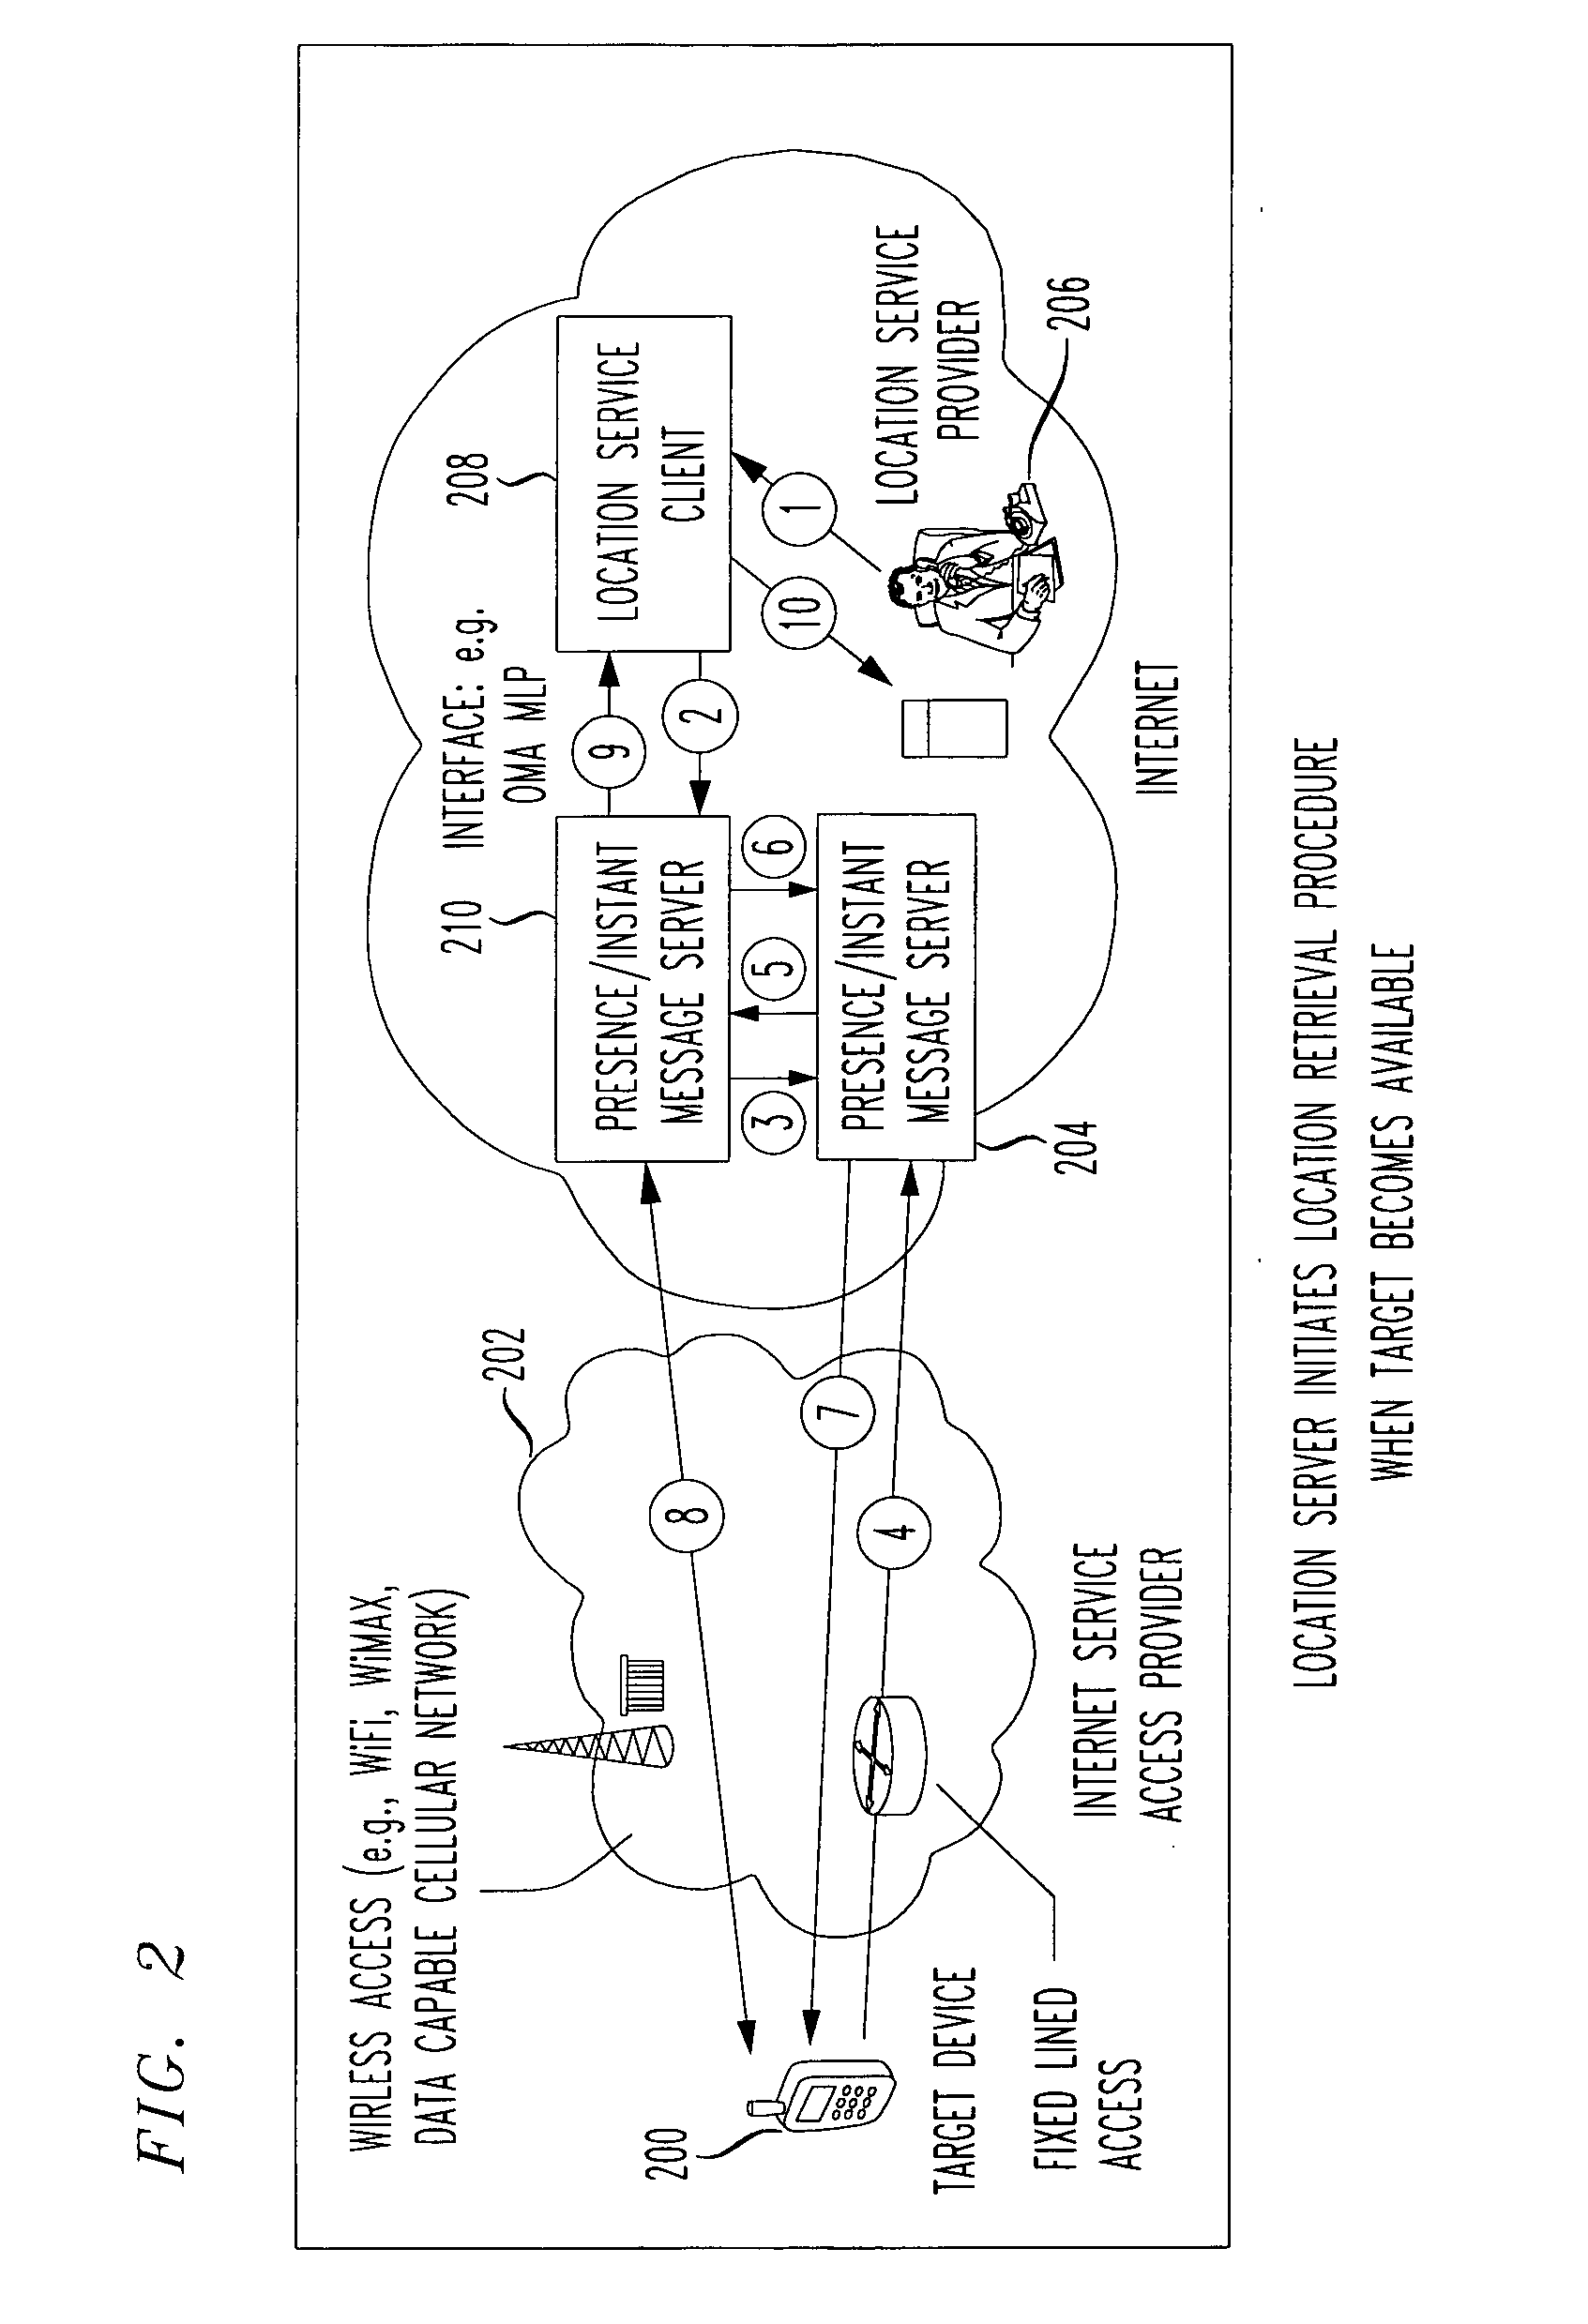 User plane location services over session initiation protocol (SIP)